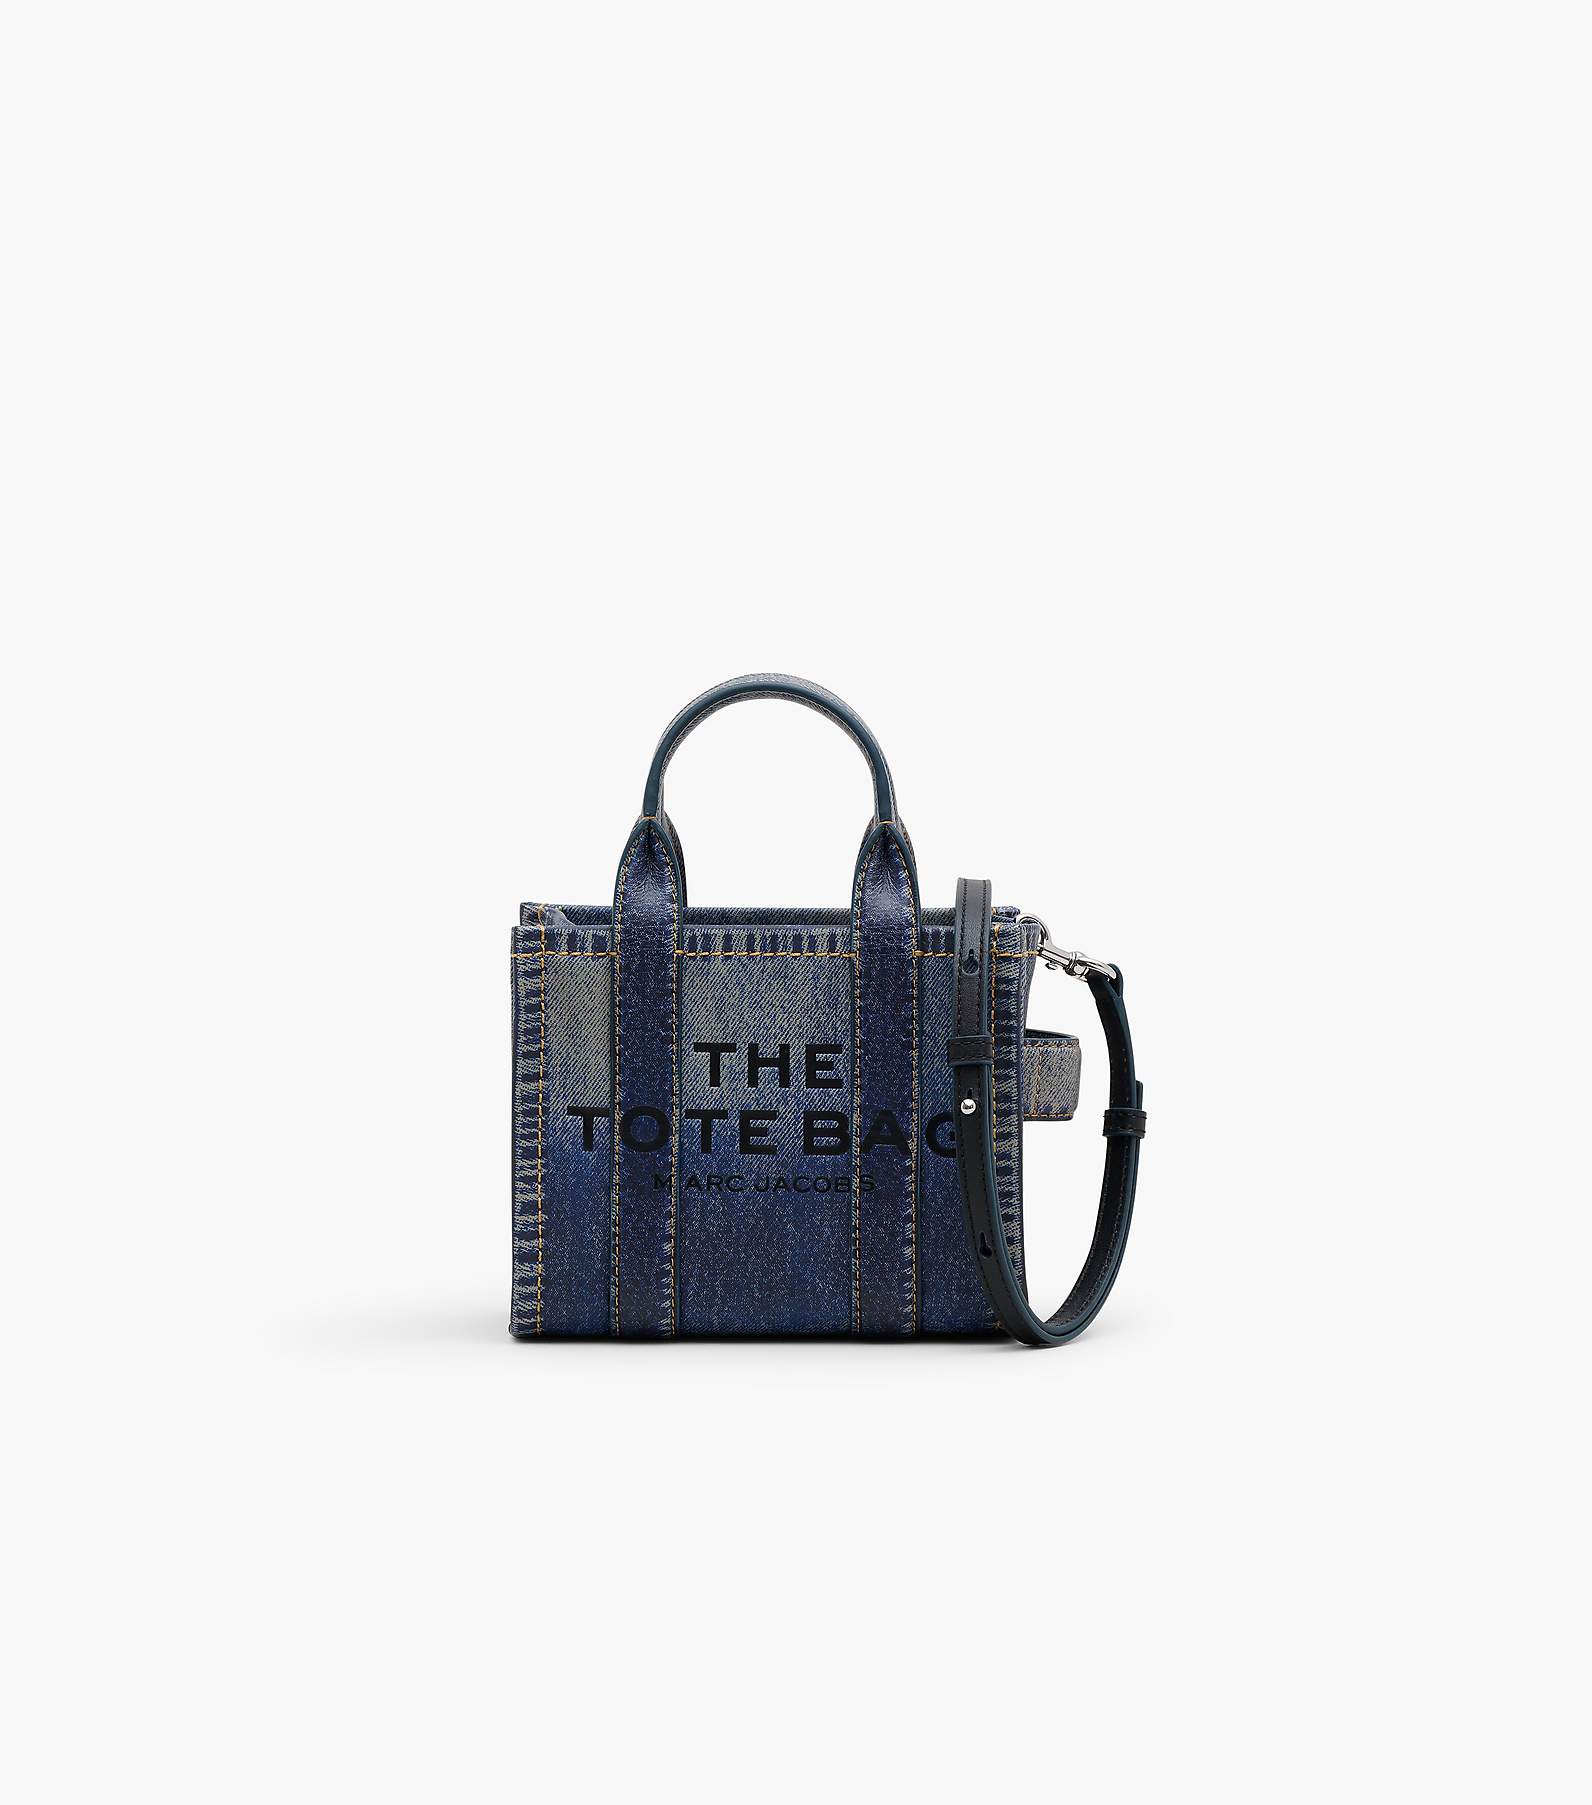 The bucket mini leather bag by Marc Jacobs in 2023